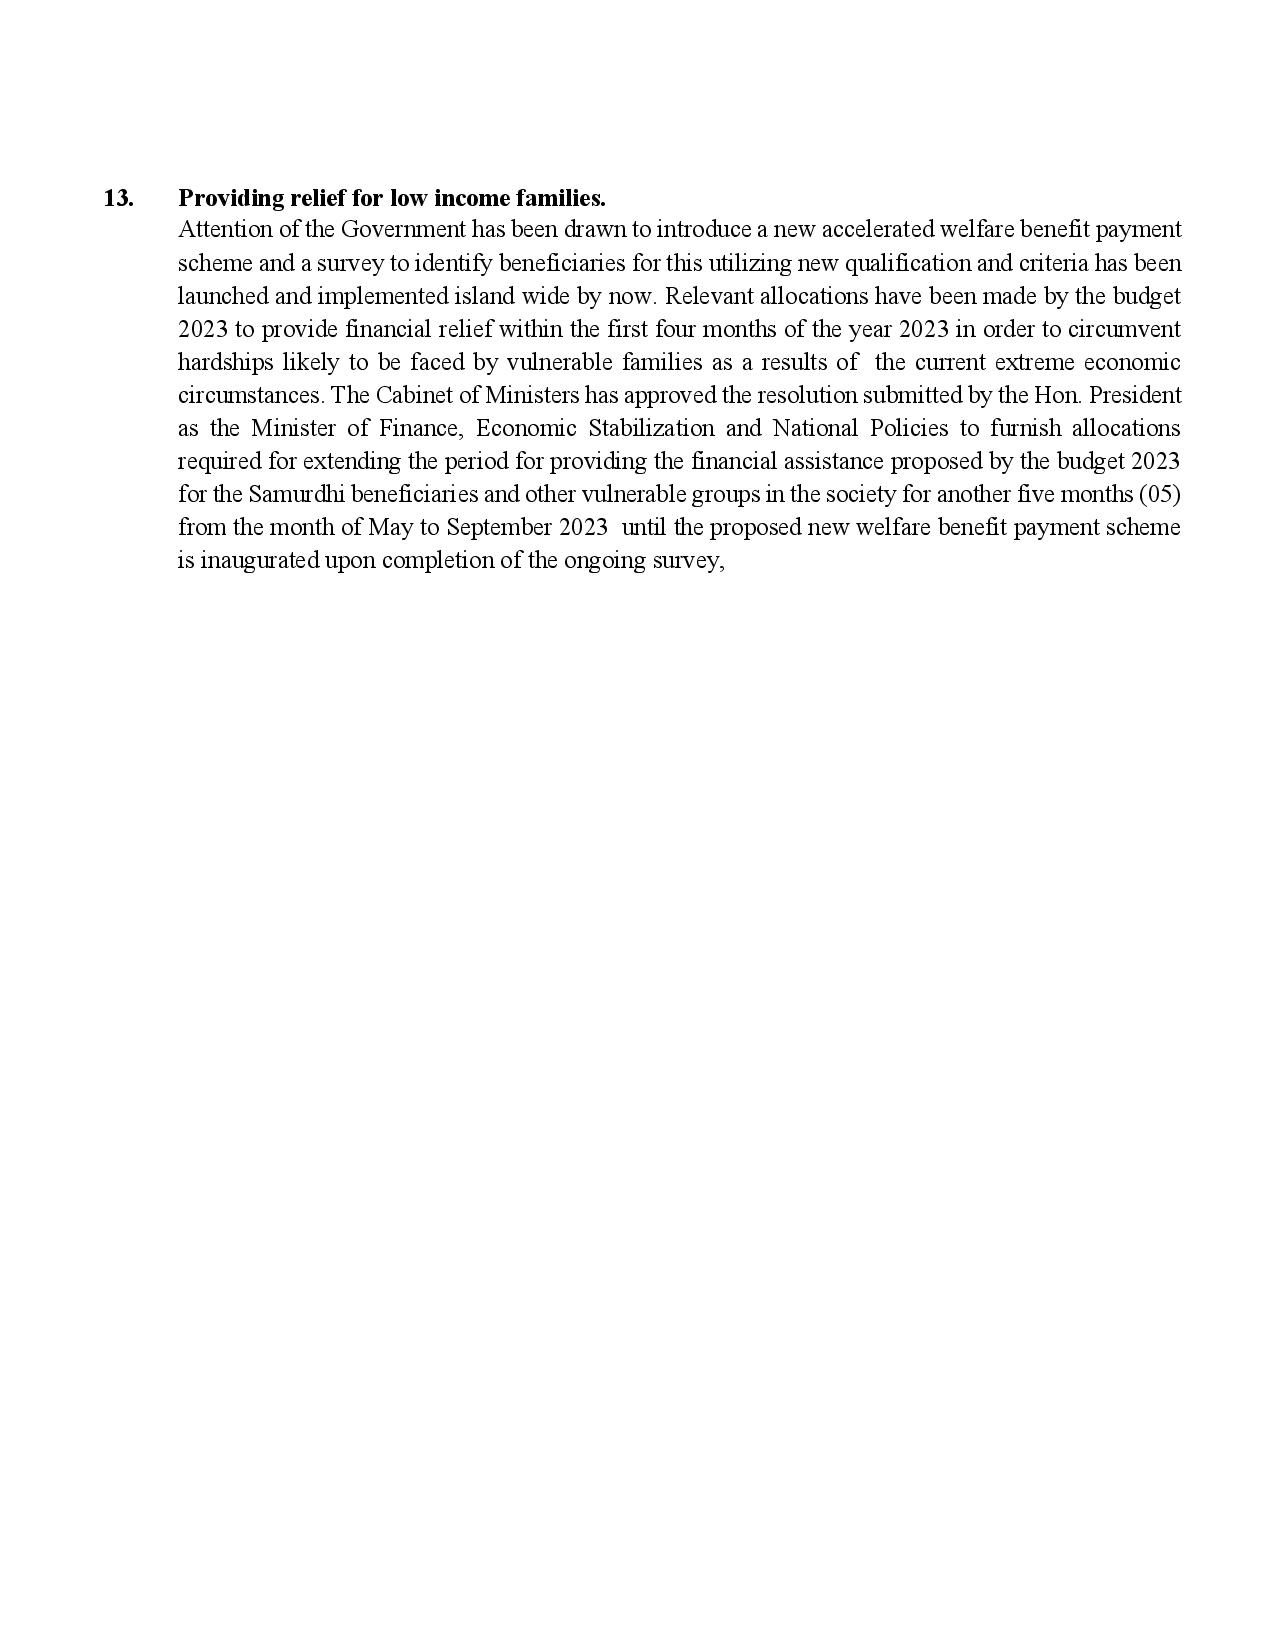 Cabinet Decision on 16.01.2023 English page 004